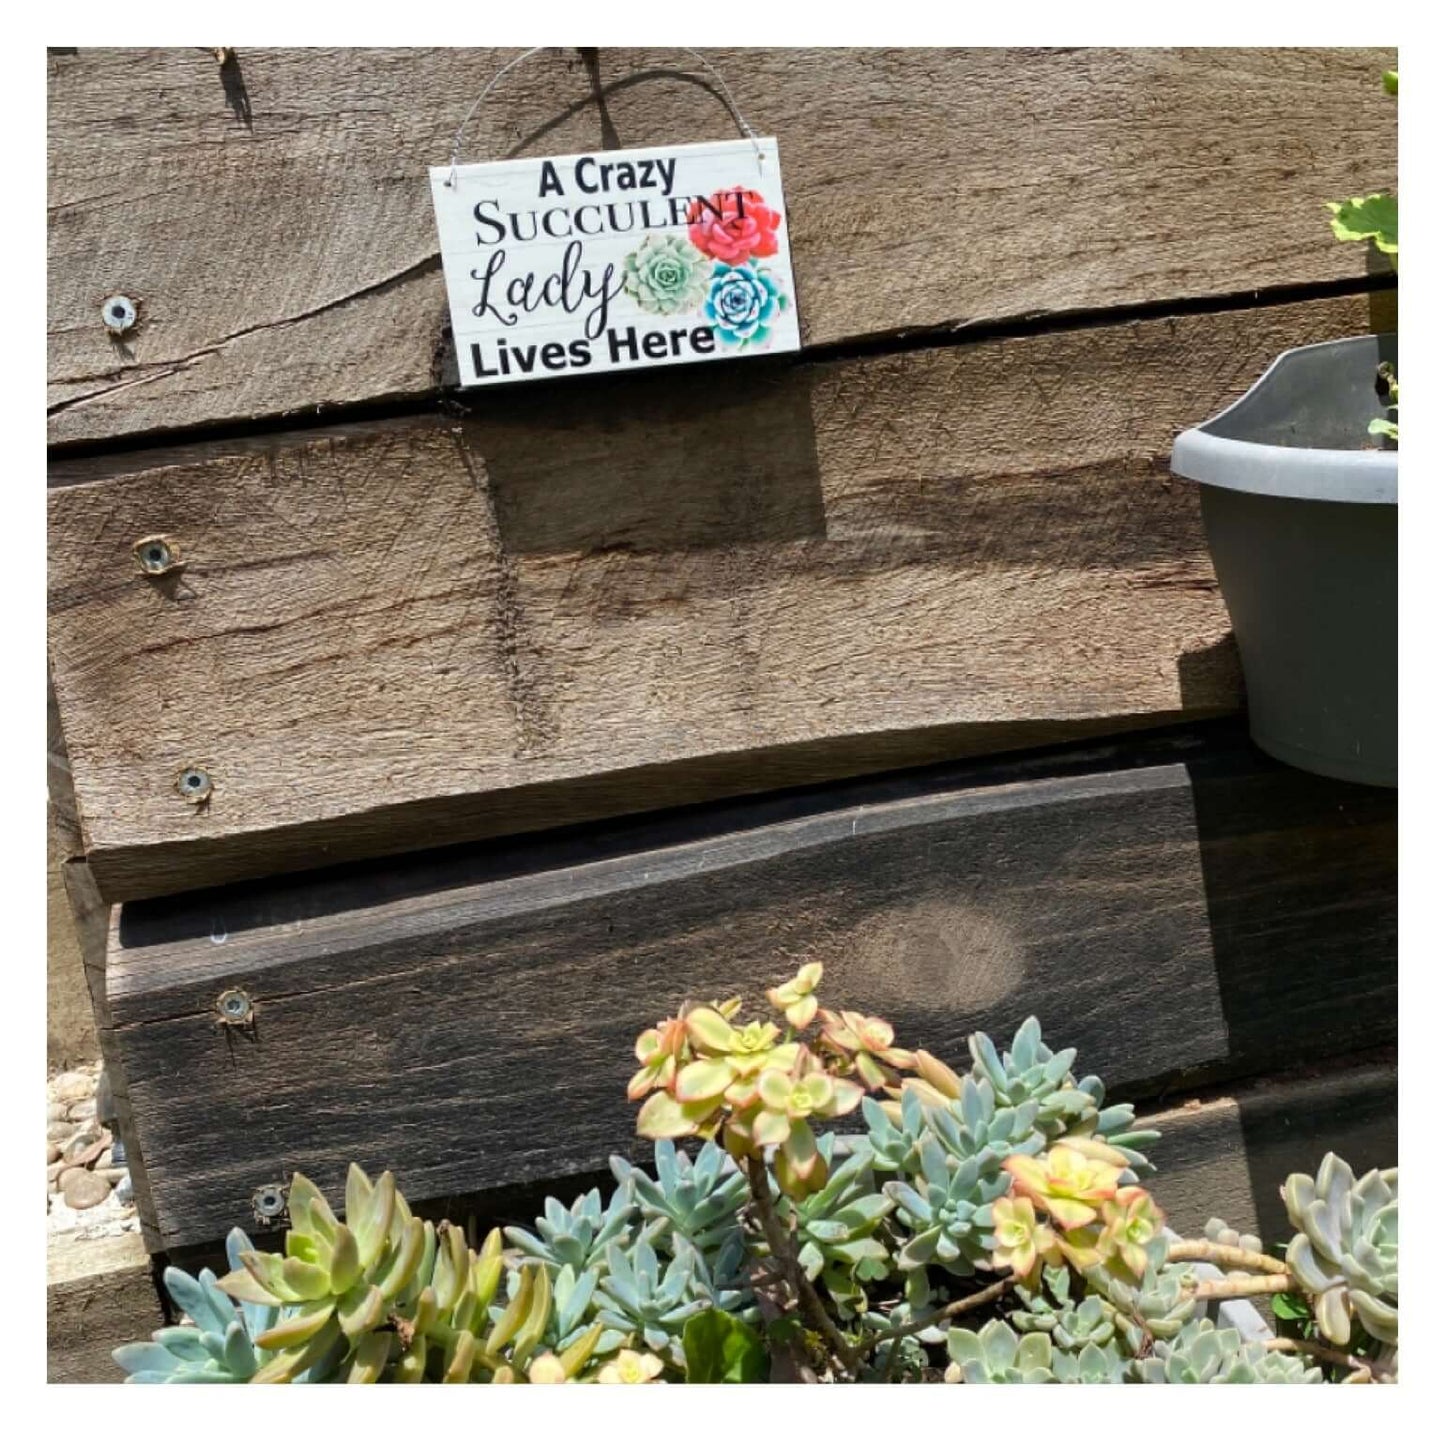 Crazy Succulent Lady Lives Here Sign - The Renmy Store Homewares & Gifts 